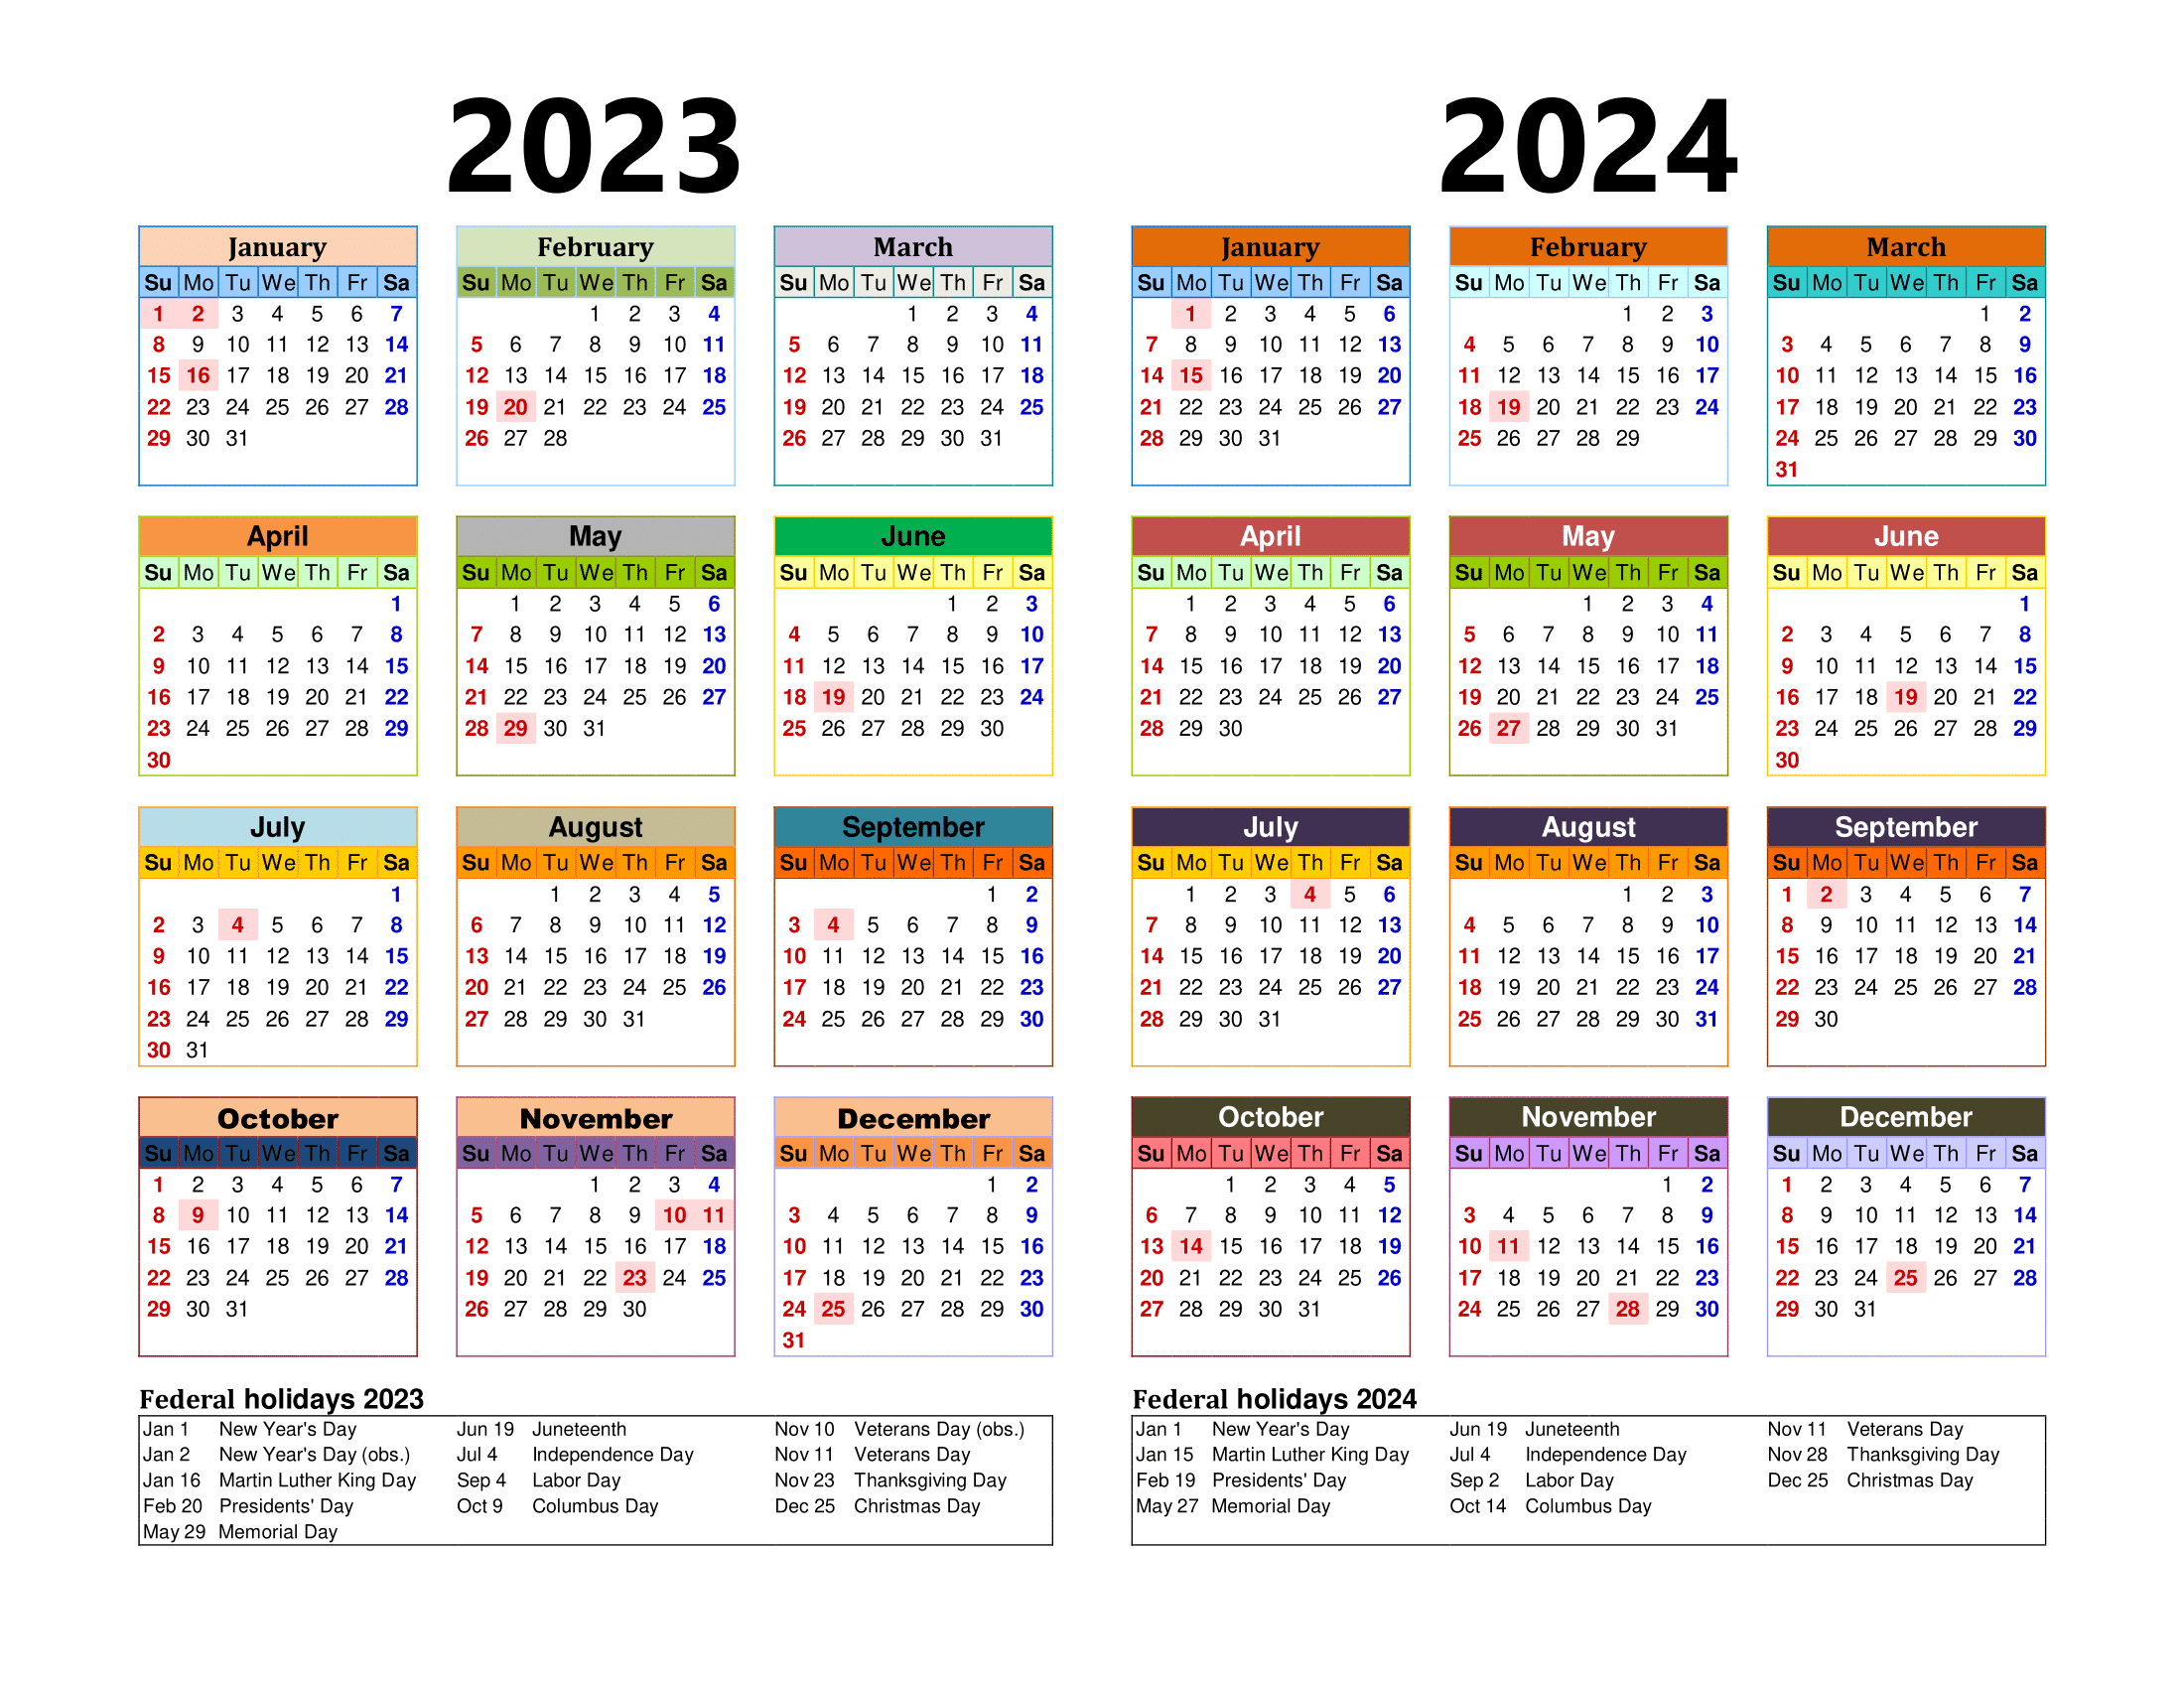 Free Printable Two Year Calendar Templates For 2023 And 2024 In Pdf | Yearly Calendar 2023 And 2024